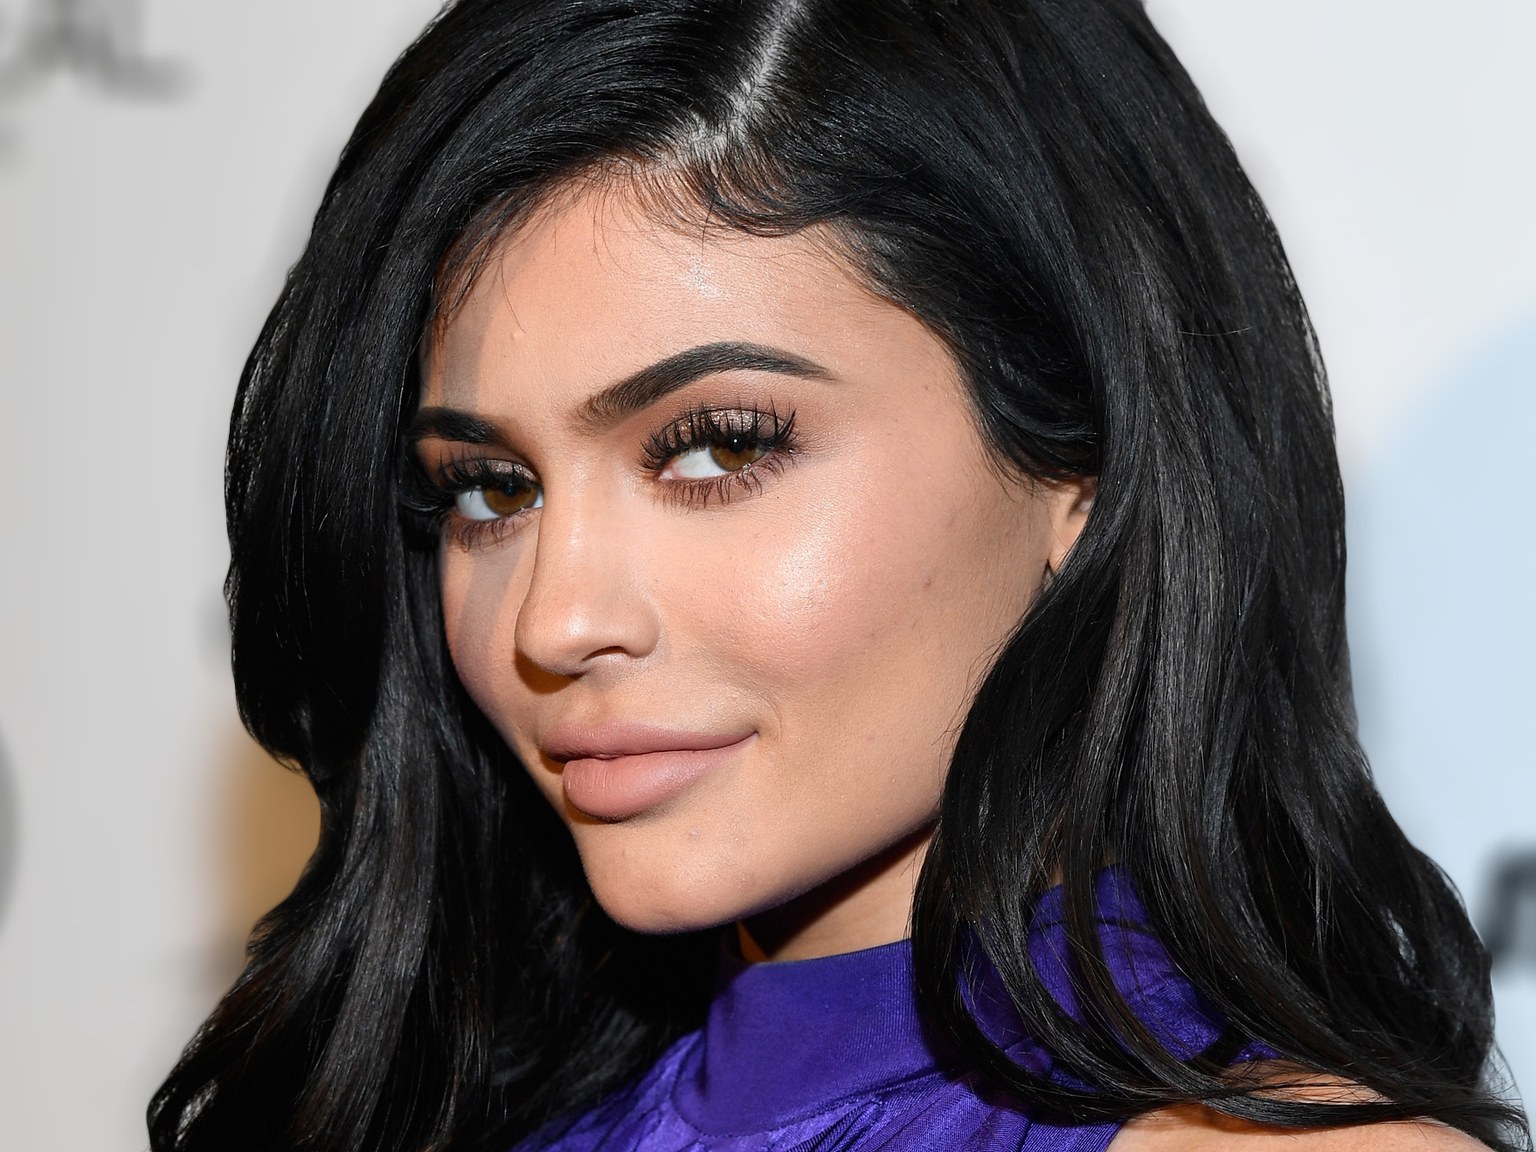 Kylie Jenners Ditched All the Other Kids with the Plumped Up Lips ...